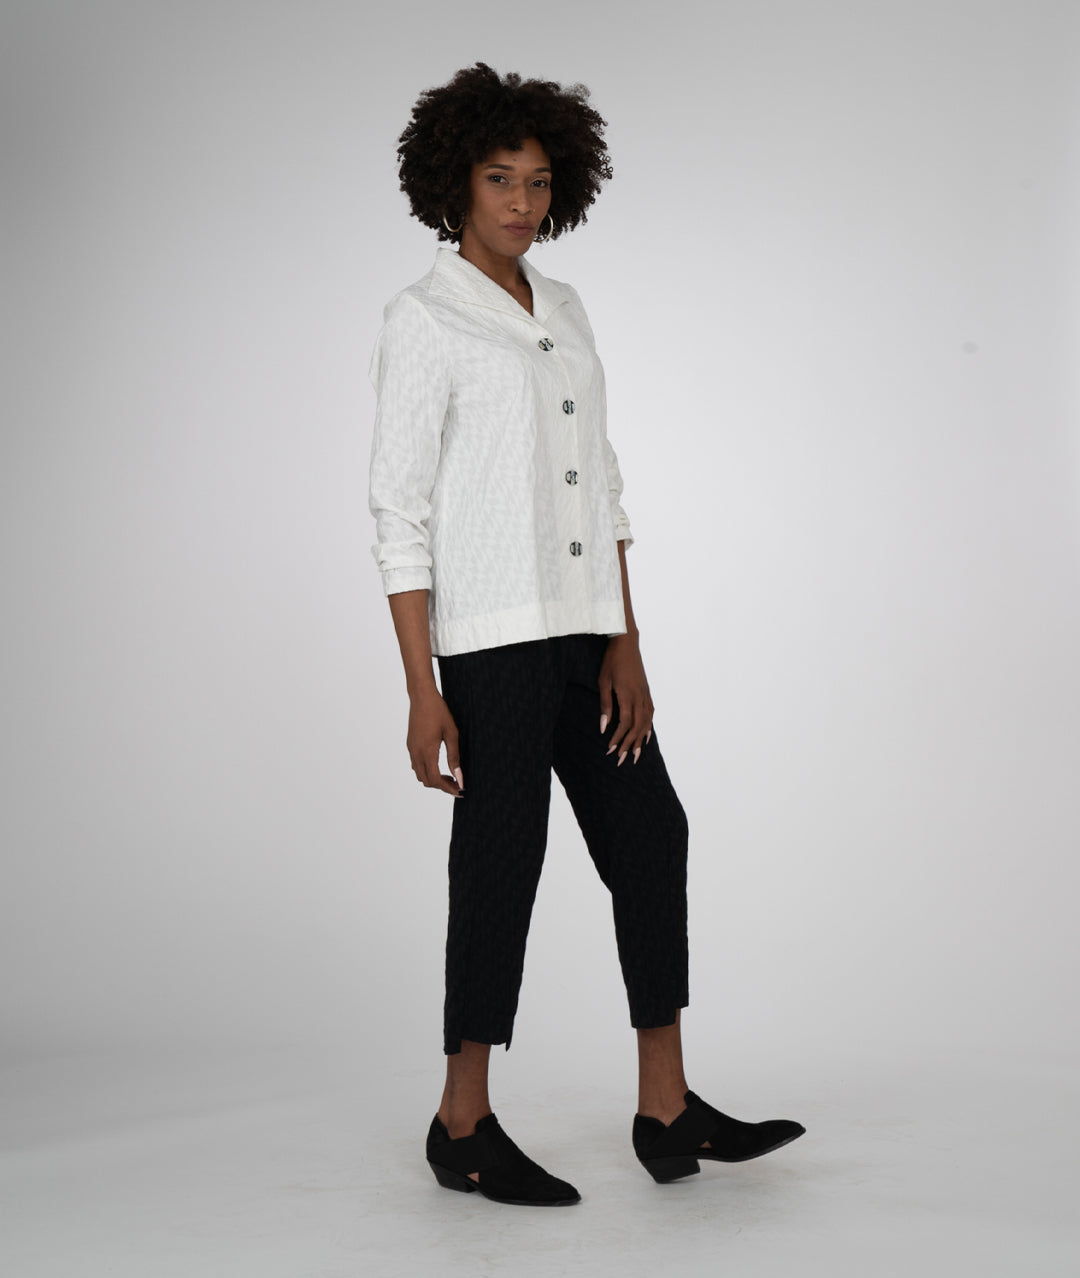 model in a white blouse and a straight leg black diamond knit pant with a stair-step hem